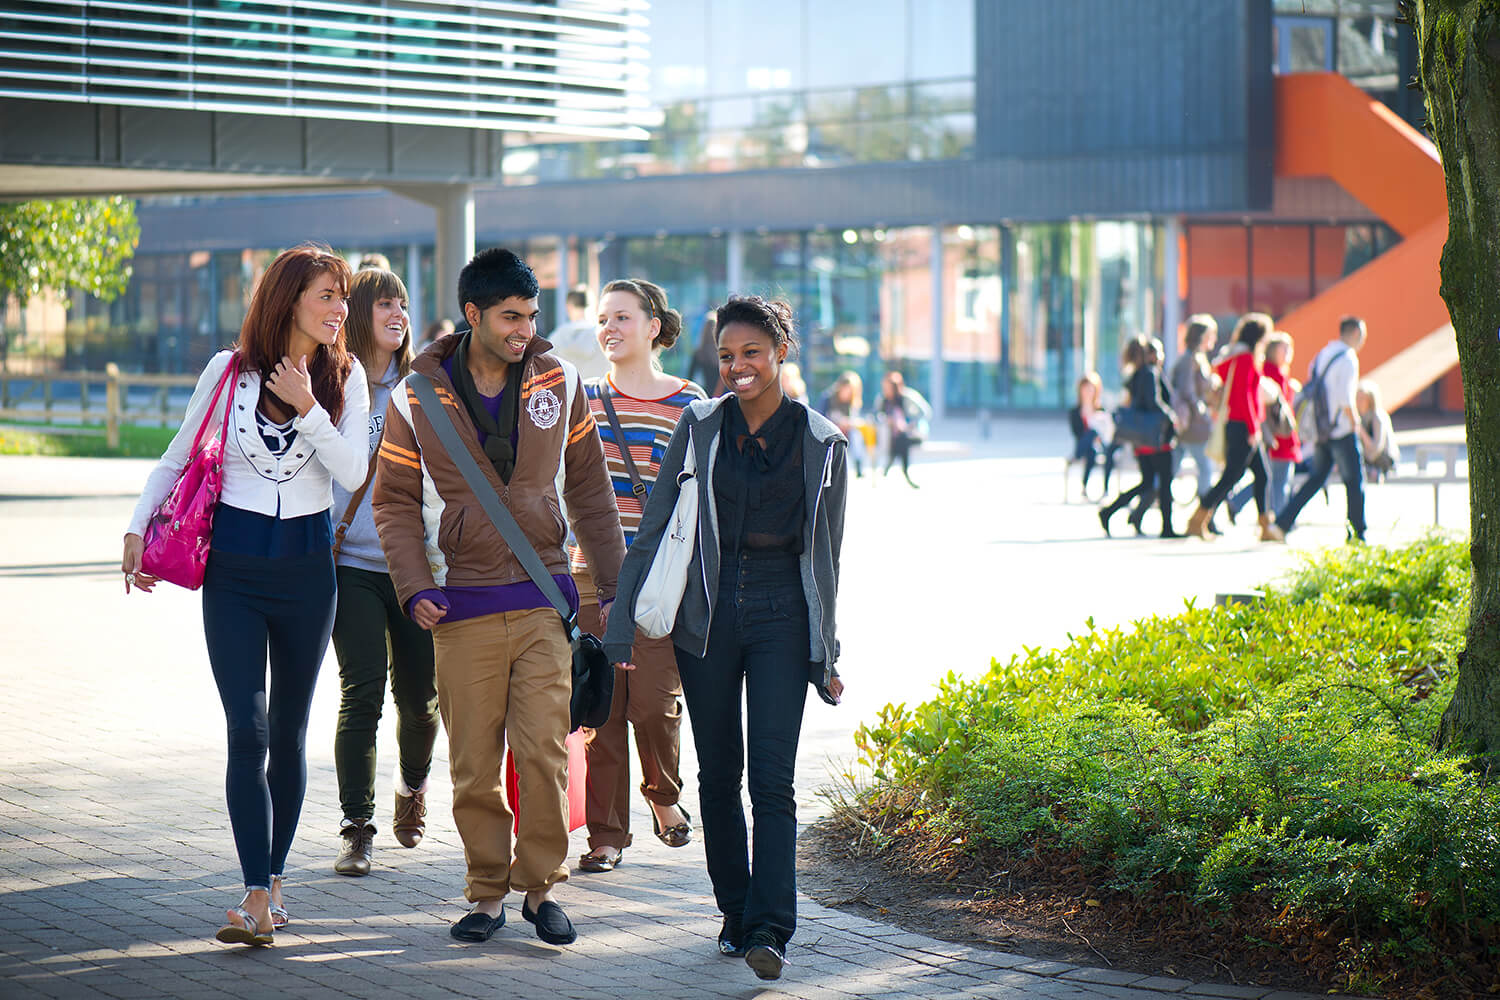 Students walk past the Business School in the centre of the campus, with the Hub visible behind them.